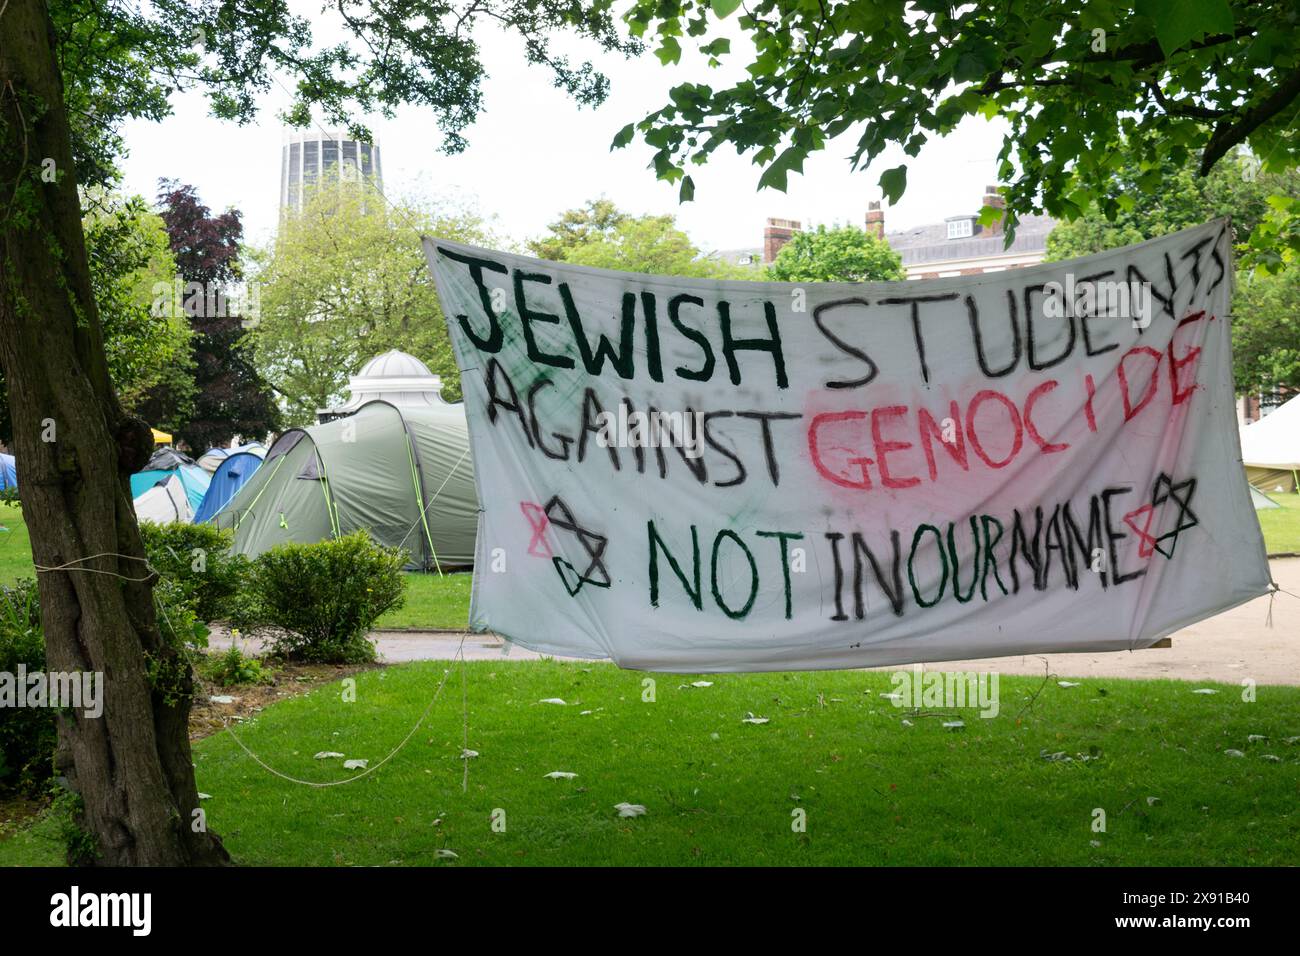 Protest at University of Liverpool, Abercromby Square. Sign text Jewish Students Against Genocide Stock Photo